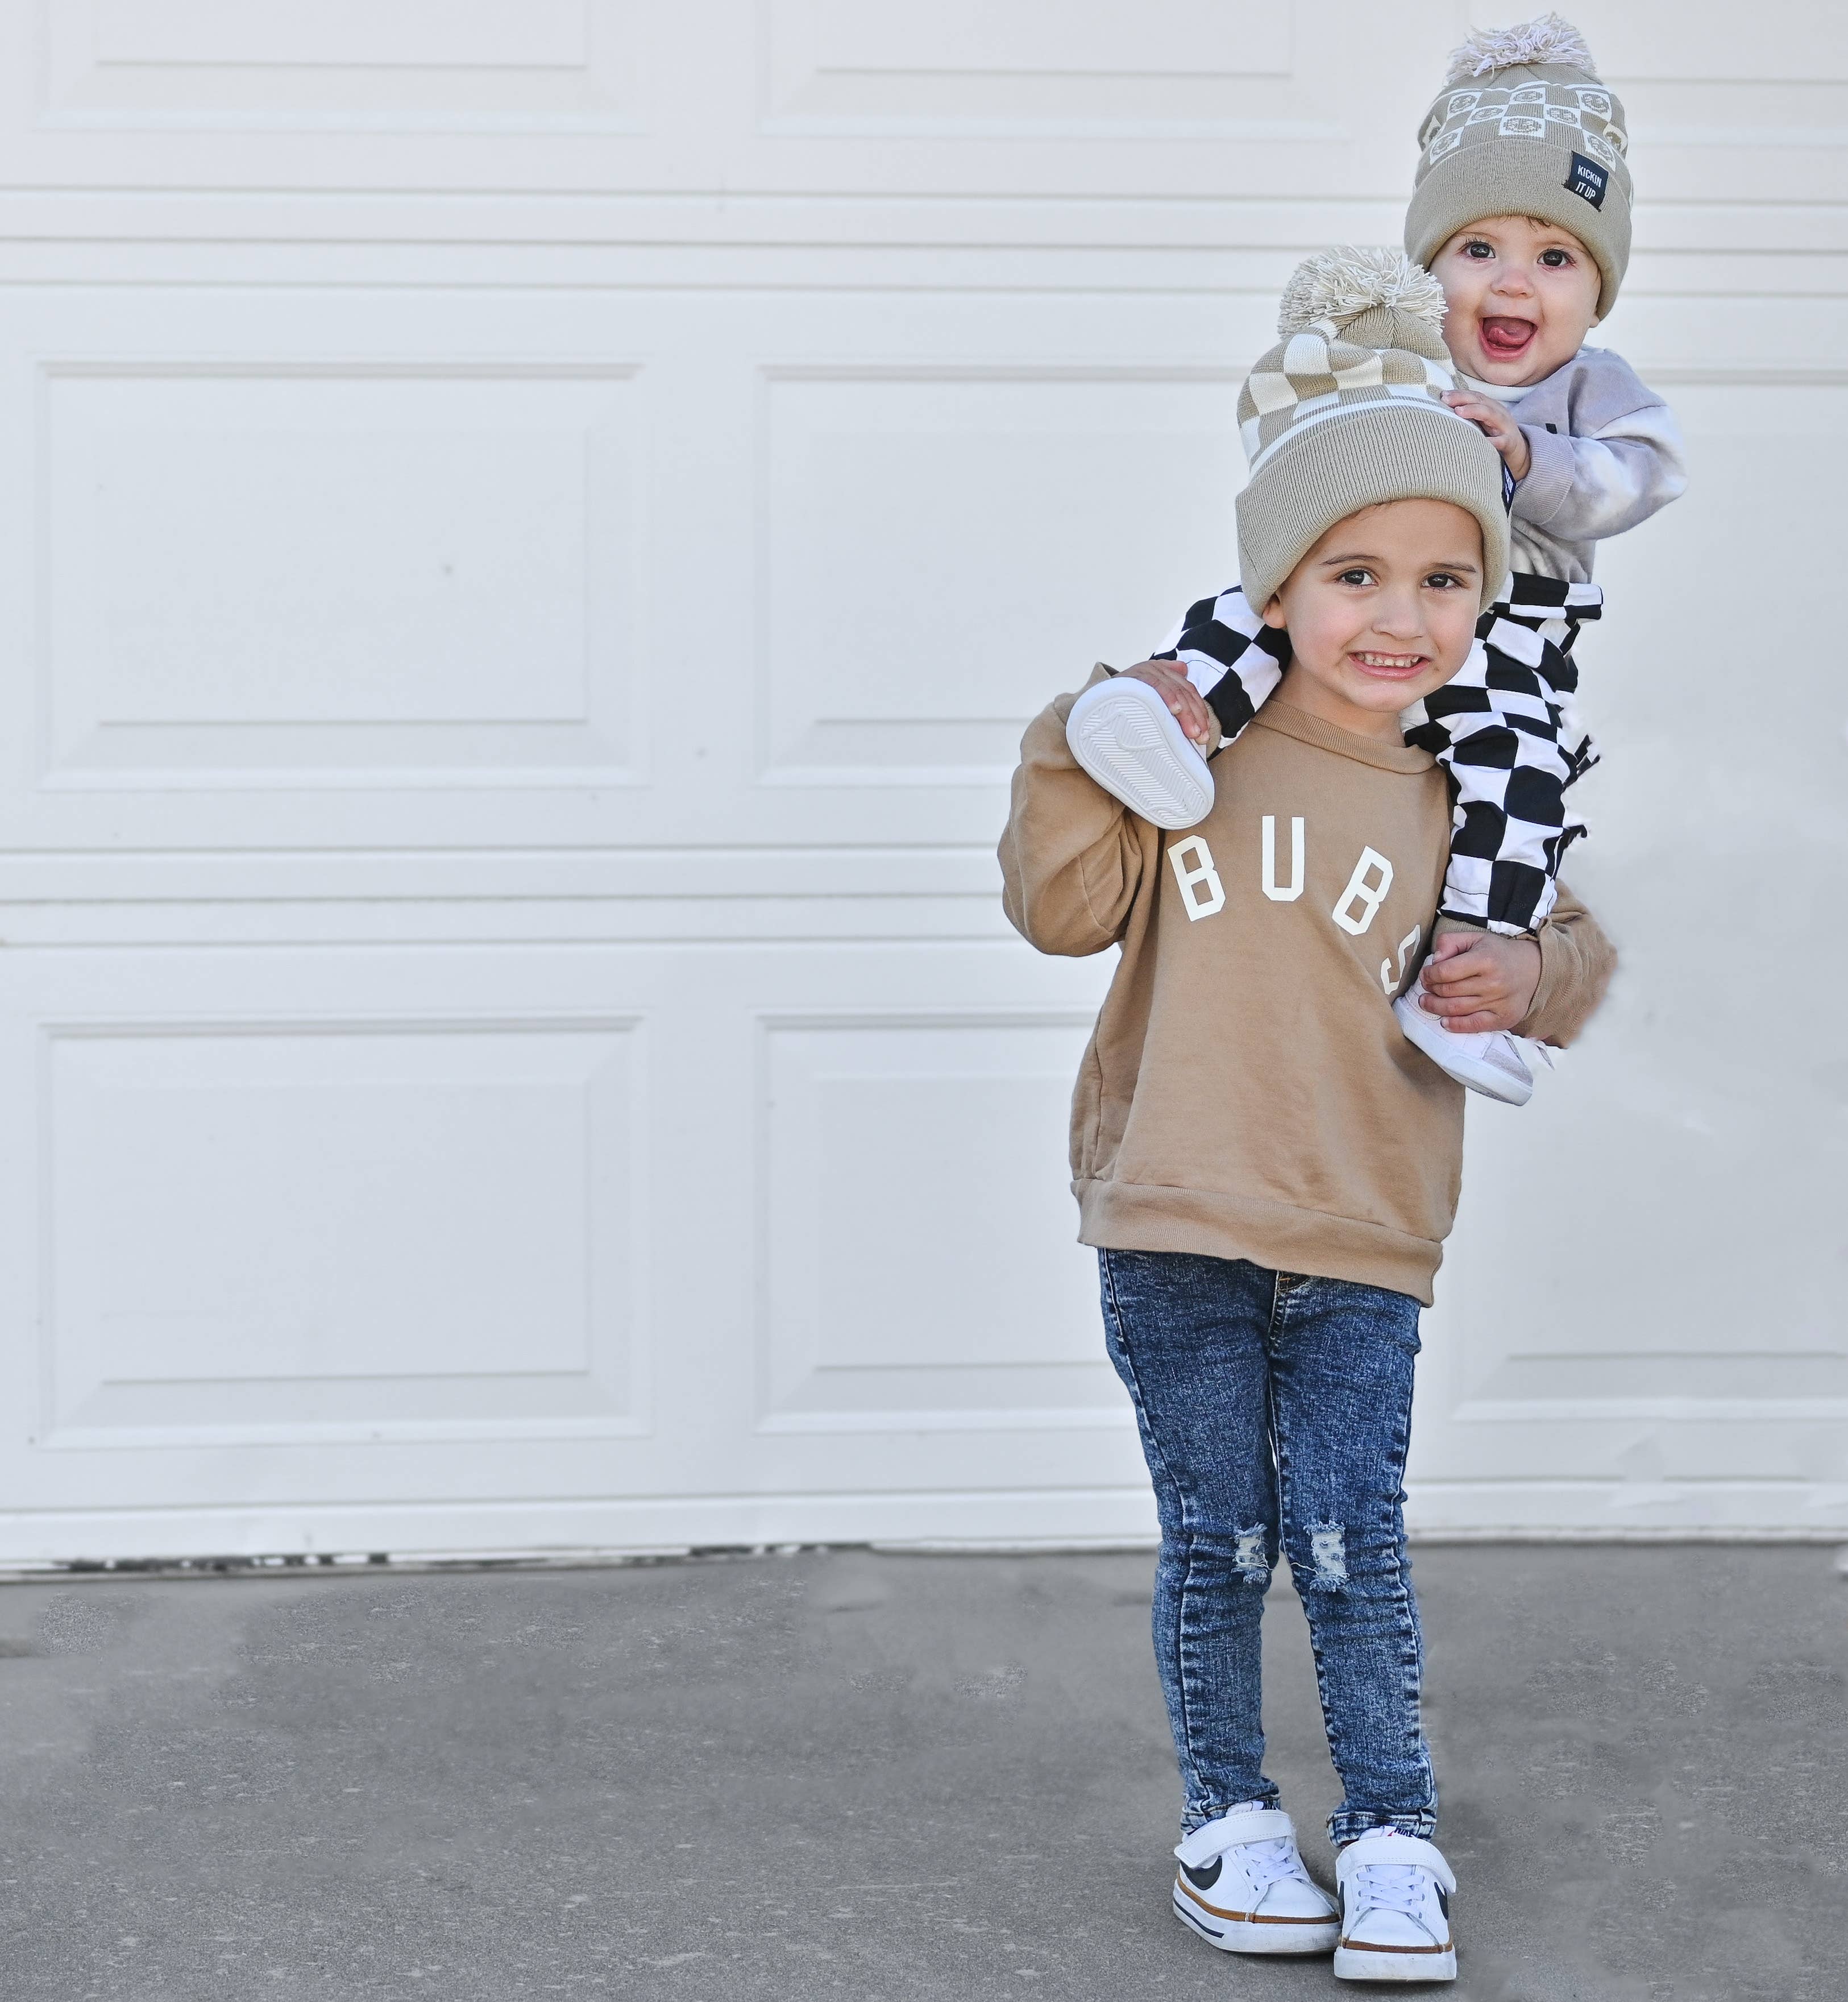 Tan Smiley Check Beanie: Toddler 18 Months-4.5 Years Old